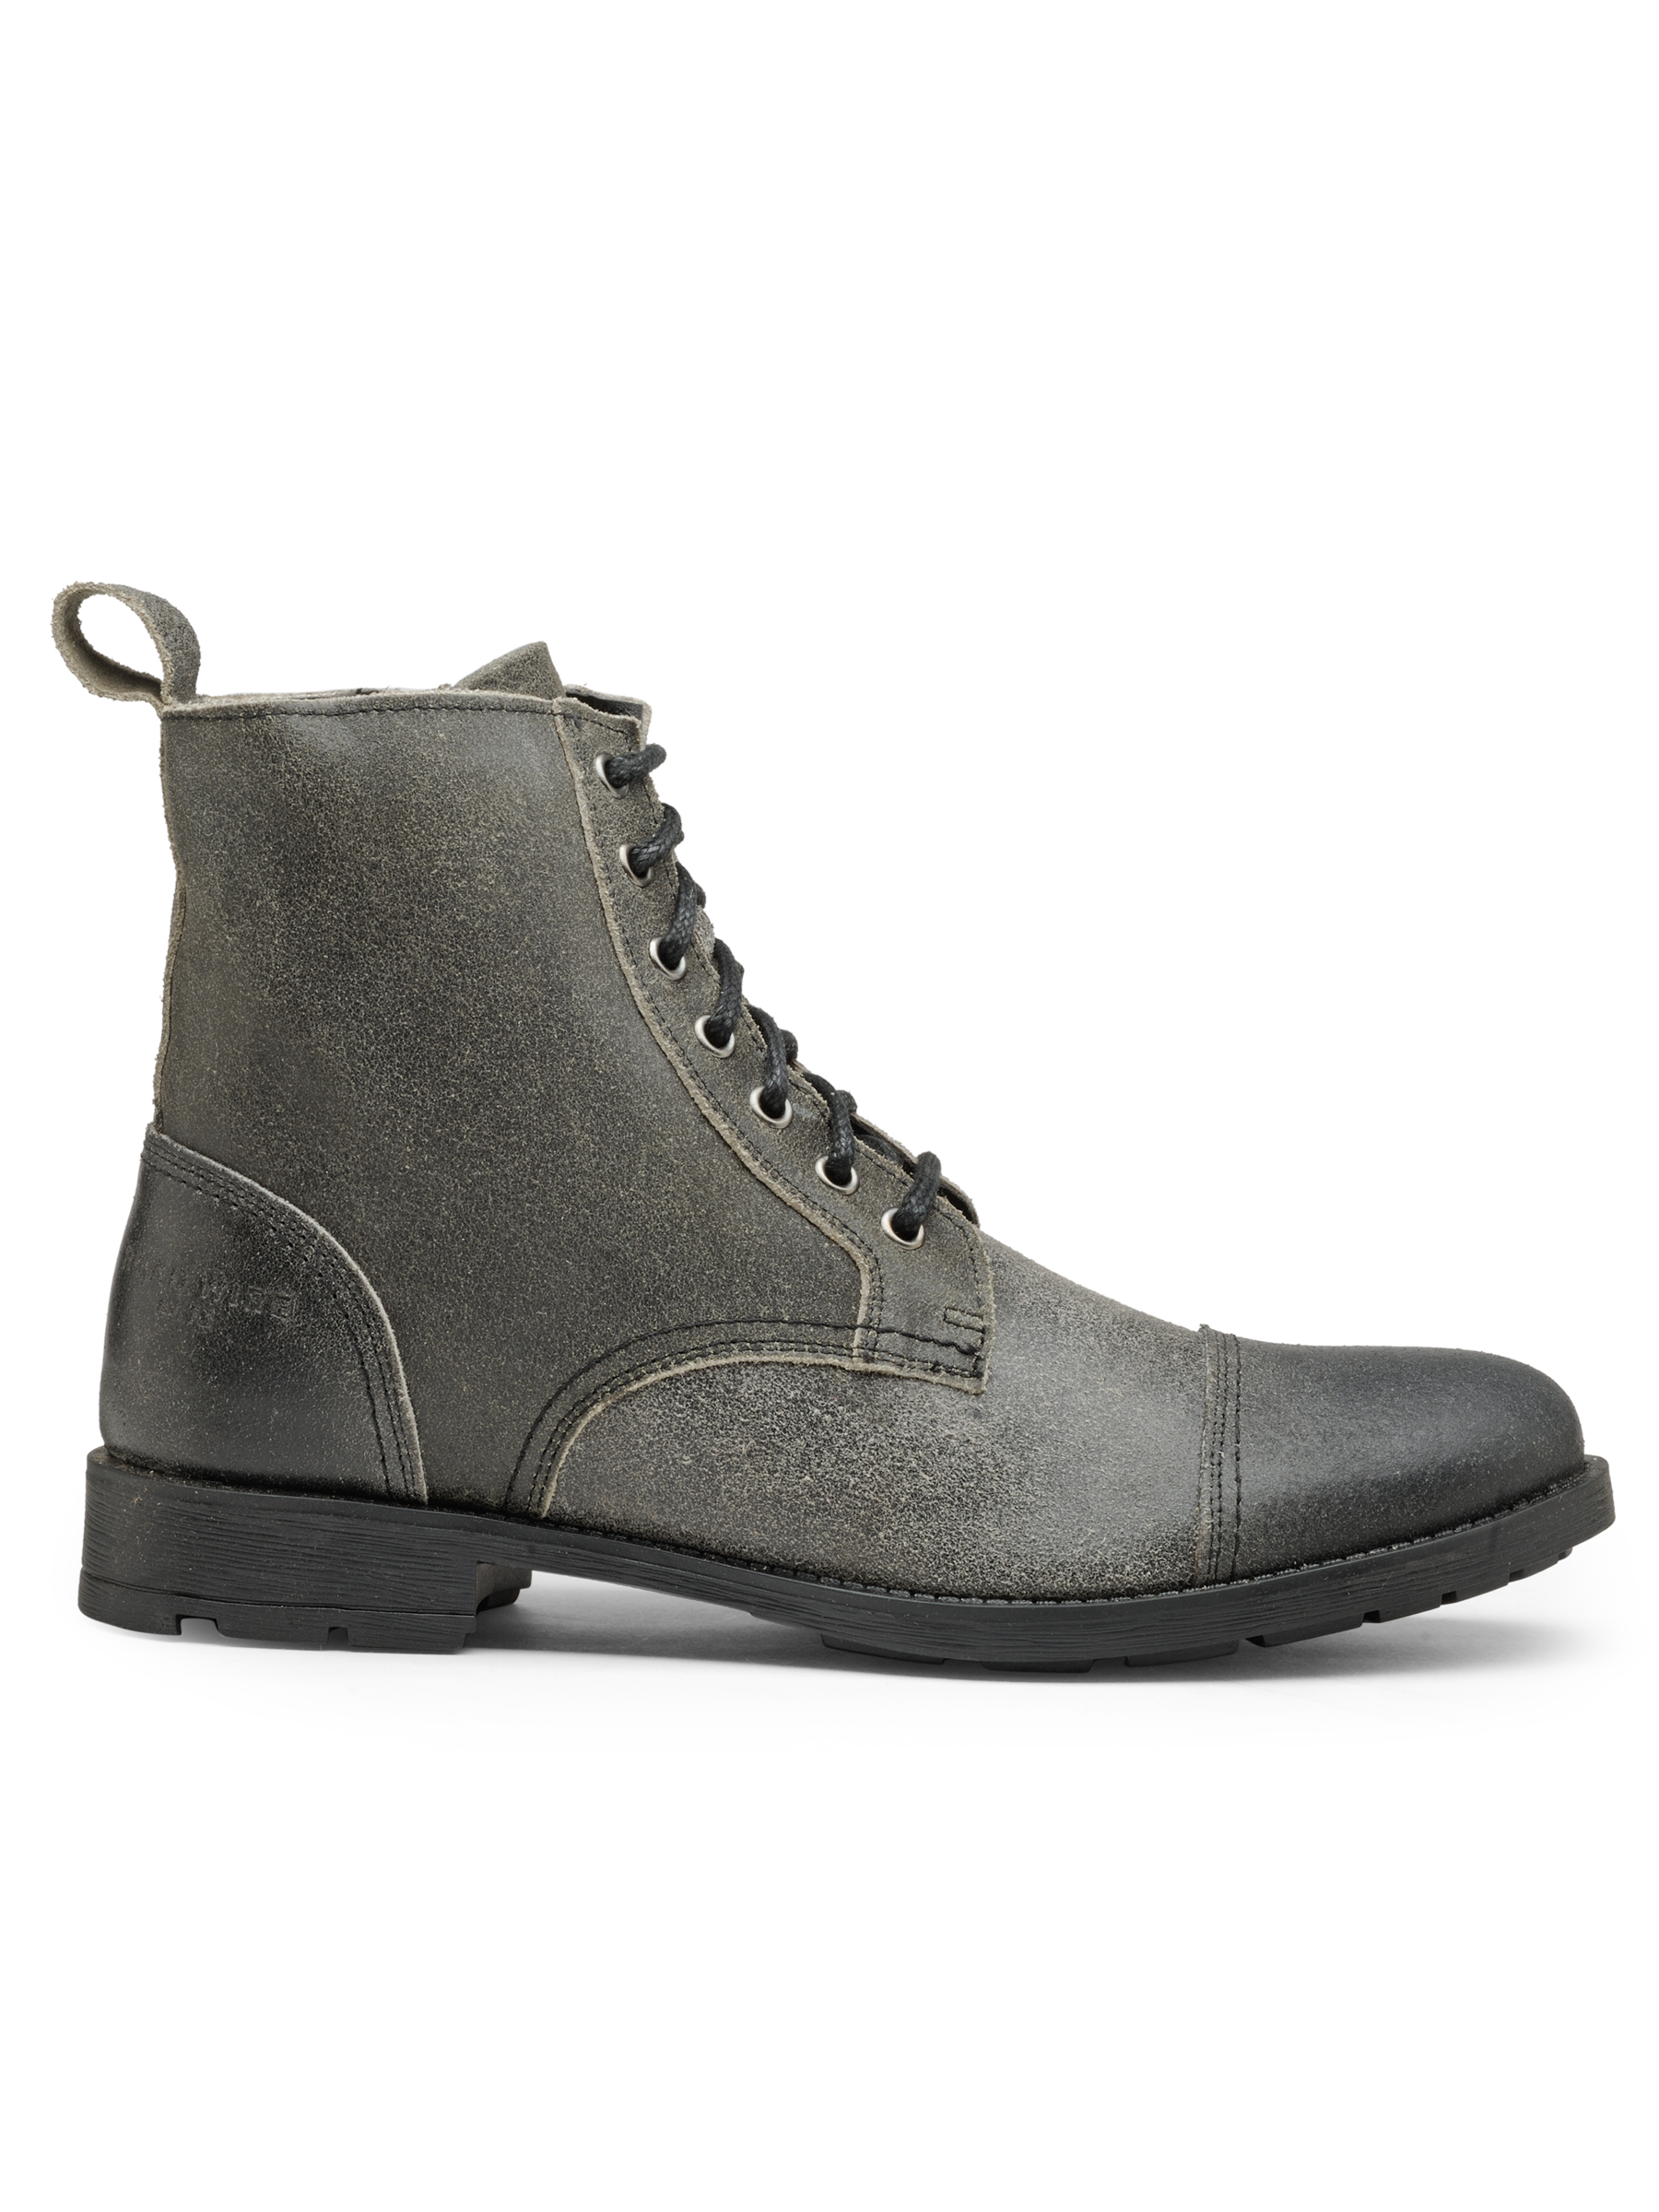 Buy Franco Leone Boots ASH Zipper Online @ ₹999 from ShopClues